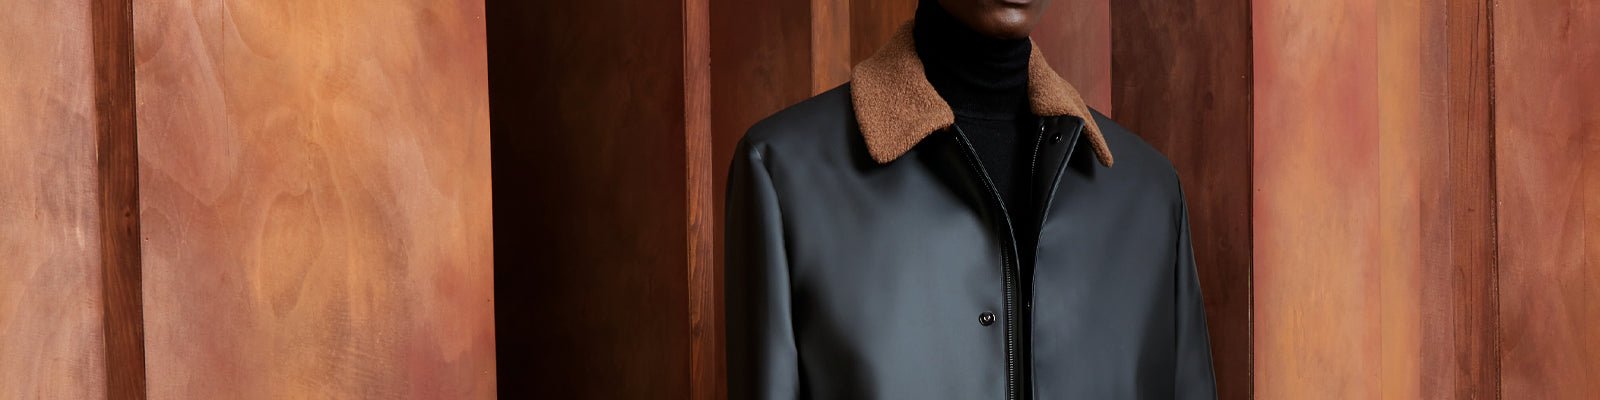 Embrace Winter with Limited Edition Men's Coats - Cardinal of Canada-US